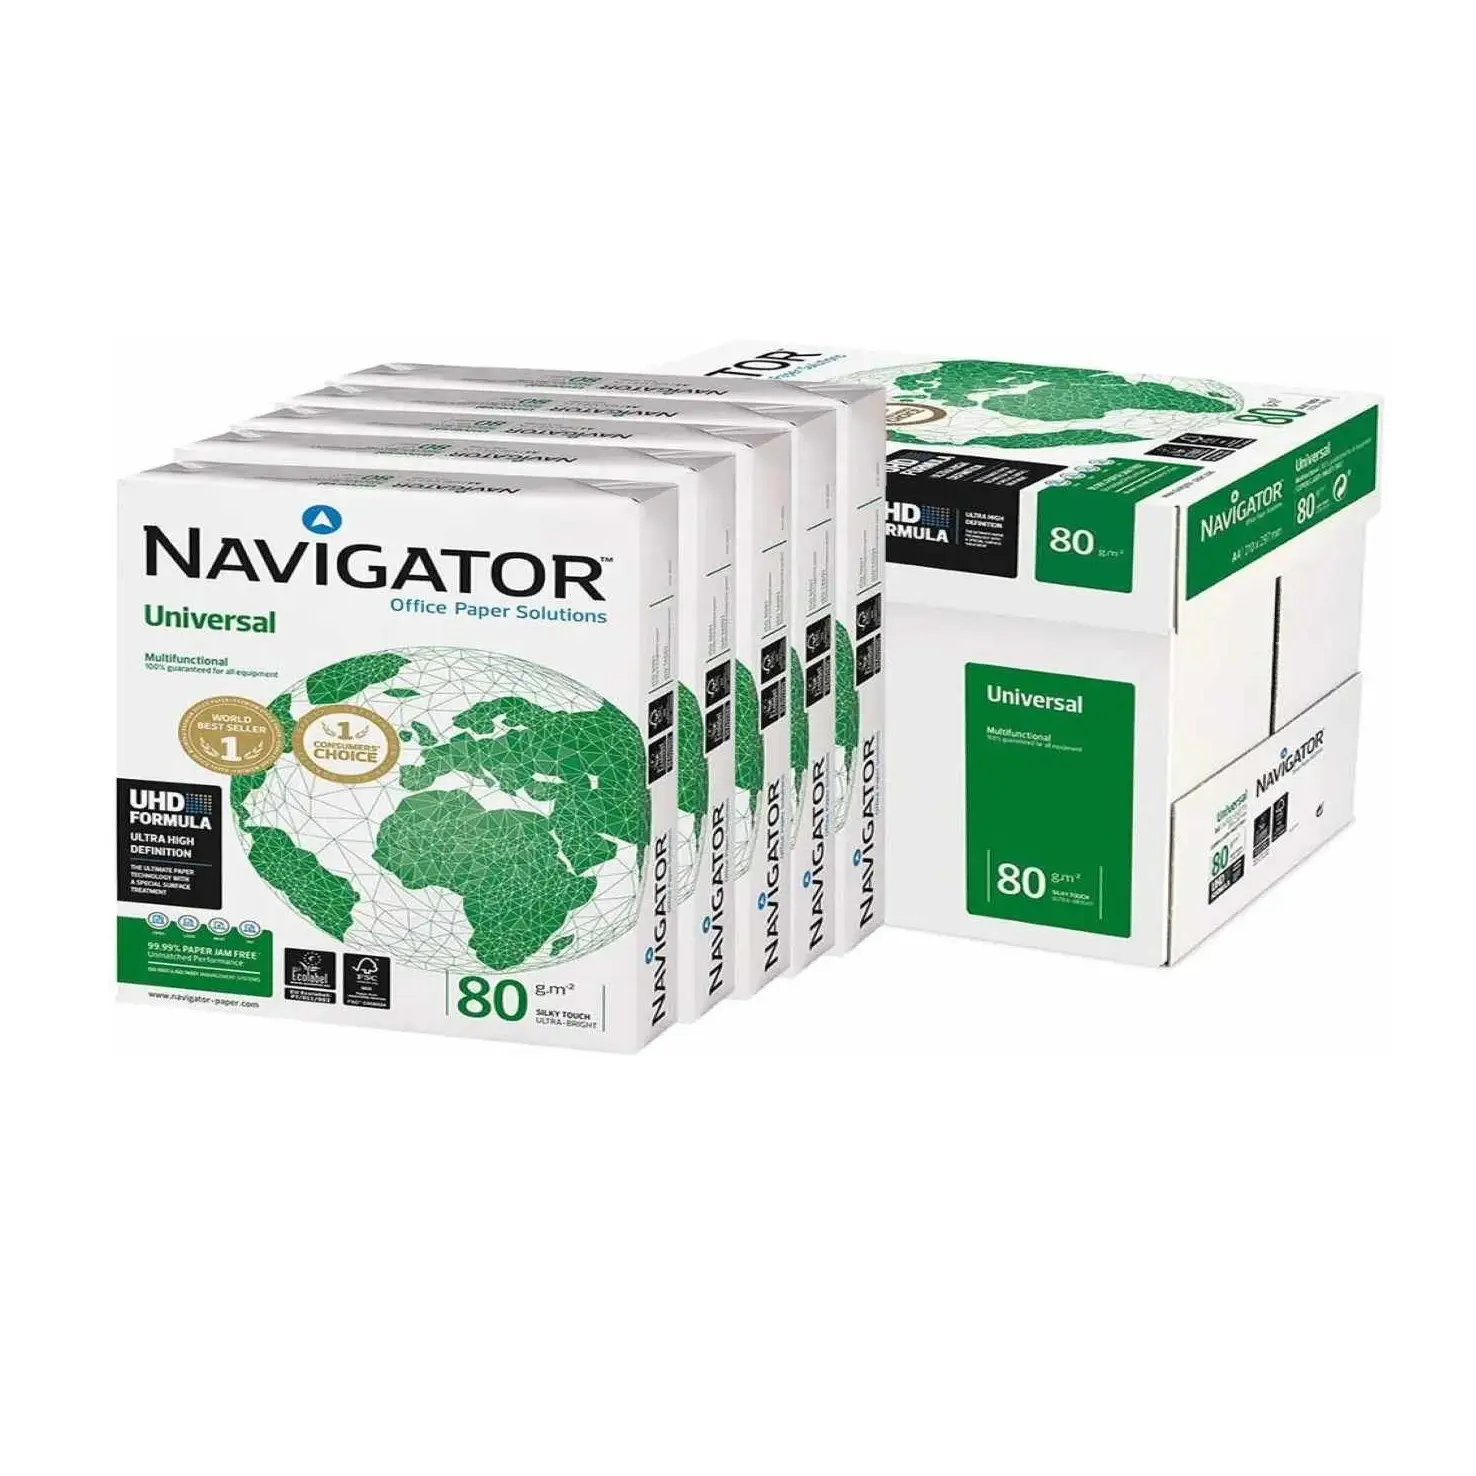 Hot-selling Universal Navigator A4 Copy Paper / A4 Paper Brands 70gsm/75gsm 80gsm